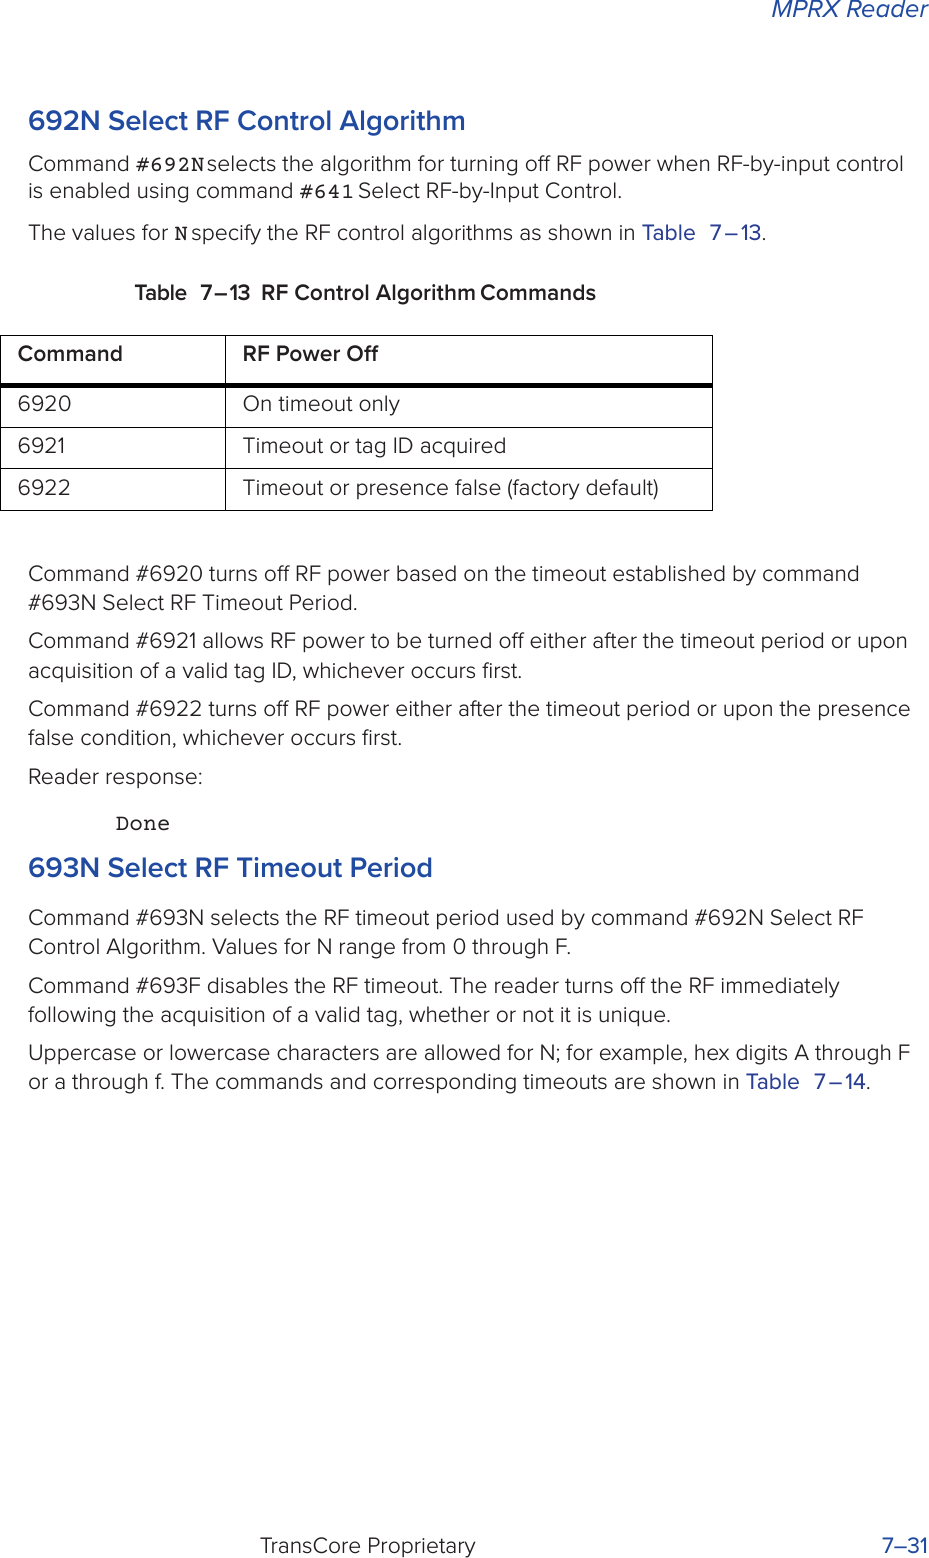 MPRX ReaderTransCore Proprietary 7–31692N Select RF Control AlgorithmCommand #692N selects the algorithm for turning o RF power when RF-by-input control is enabled using command #641 Select RF-by-Input Control.The values for N specify the RF control algorithms as shown in Table 7 – 13.Table 7 – 13 RF Control Algorithm CommandsCommand #6920 turns o RF power based on the timeout established by command #693N Select RF Timeout Period.Command #6921 allows RF power to be turned o either after the timeout period or upon acquisition of a valid tag ID, whichever occurs ﬁrst.Command #6922 turns o RF power either after the timeout period or upon the presence false condition, whichever occurs ﬁrst.Reader response:Done693N Select RF Timeout PeriodCommand #693N selects the RF timeout period used by command #692N Select RF Control Algorithm. Values for N range from 0 through F.Command #693F disables the RF timeout. The reader turns o the RF immediately following the acquisition of a valid tag, whether or not it is unique.Uppercase or lowercase characters are allowed for N; for example, hex digits A through F or a through f. The commands and corresponding timeouts are shown in Table 7 – 14.Command RF Power O6920 On timeout only6921 Timeout or tag ID acquired6922 Timeout or presence false (factory default)